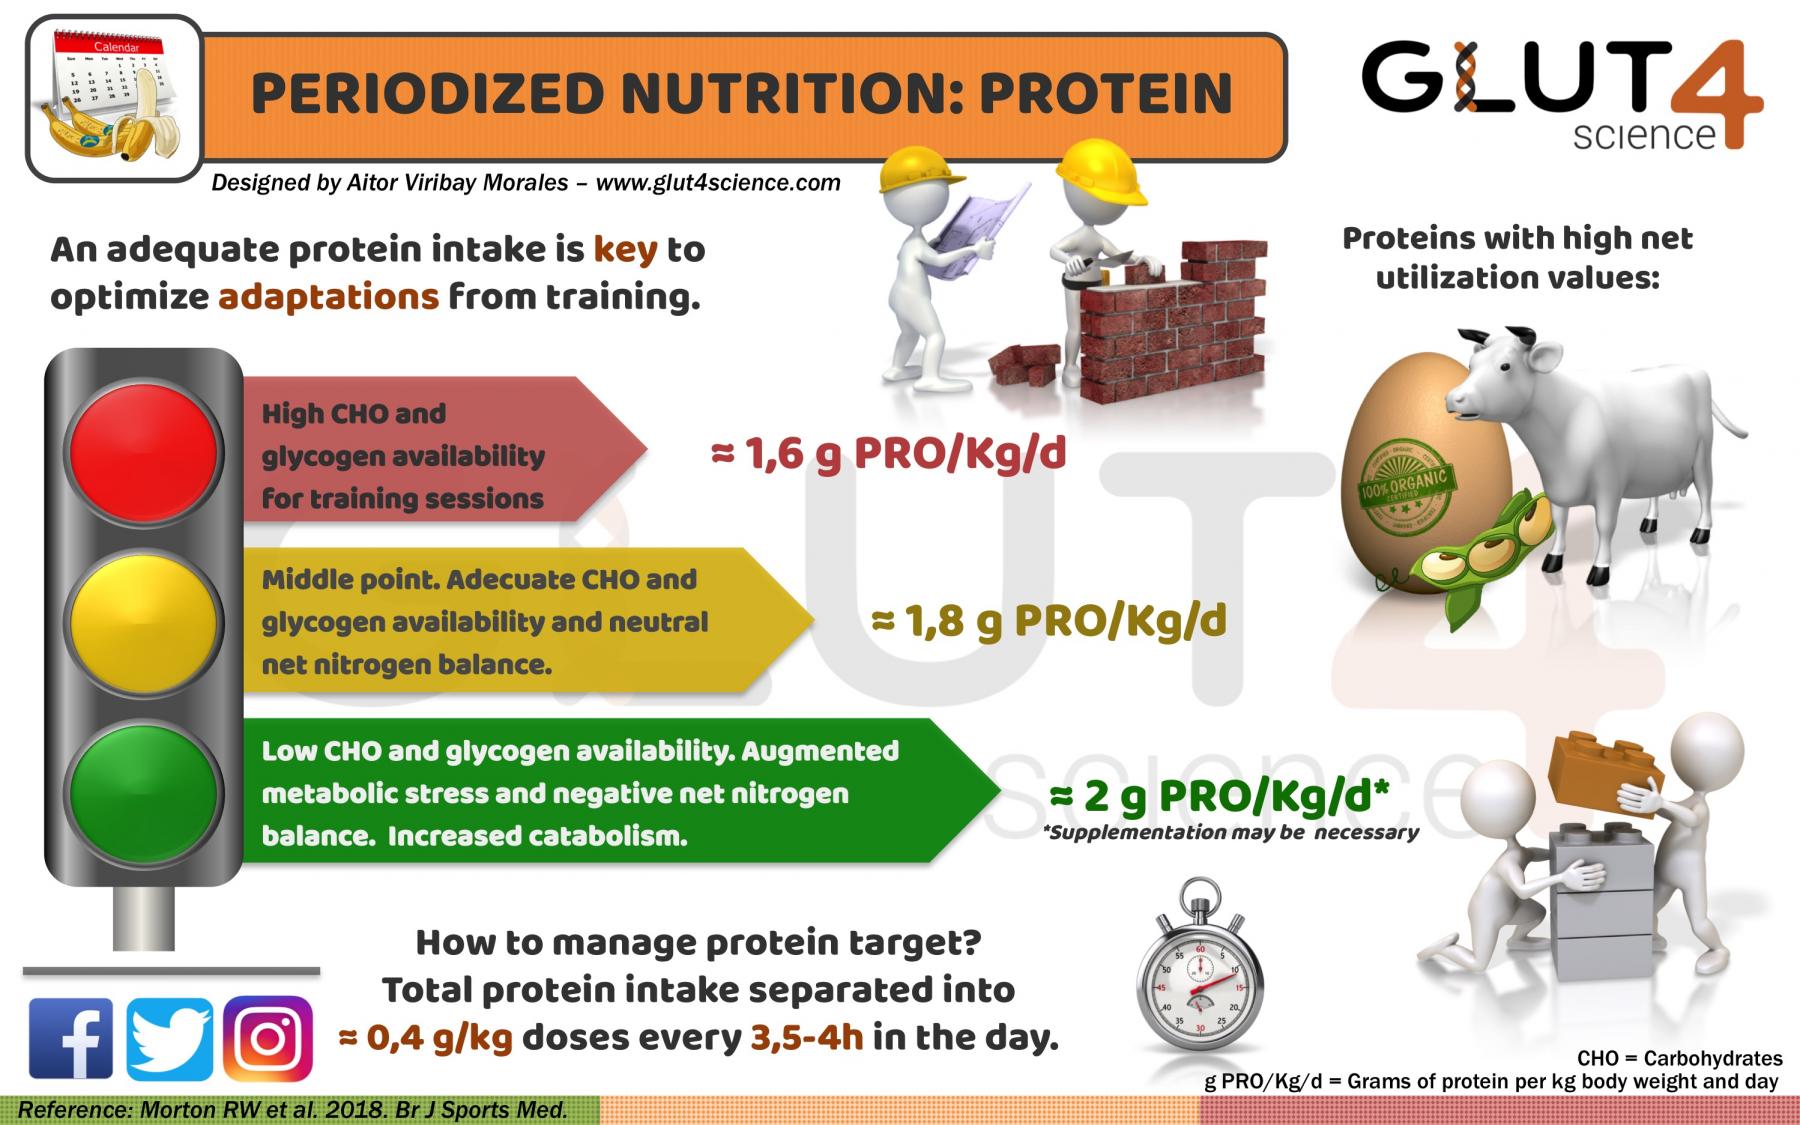 Periodized Nutrition and Proteins